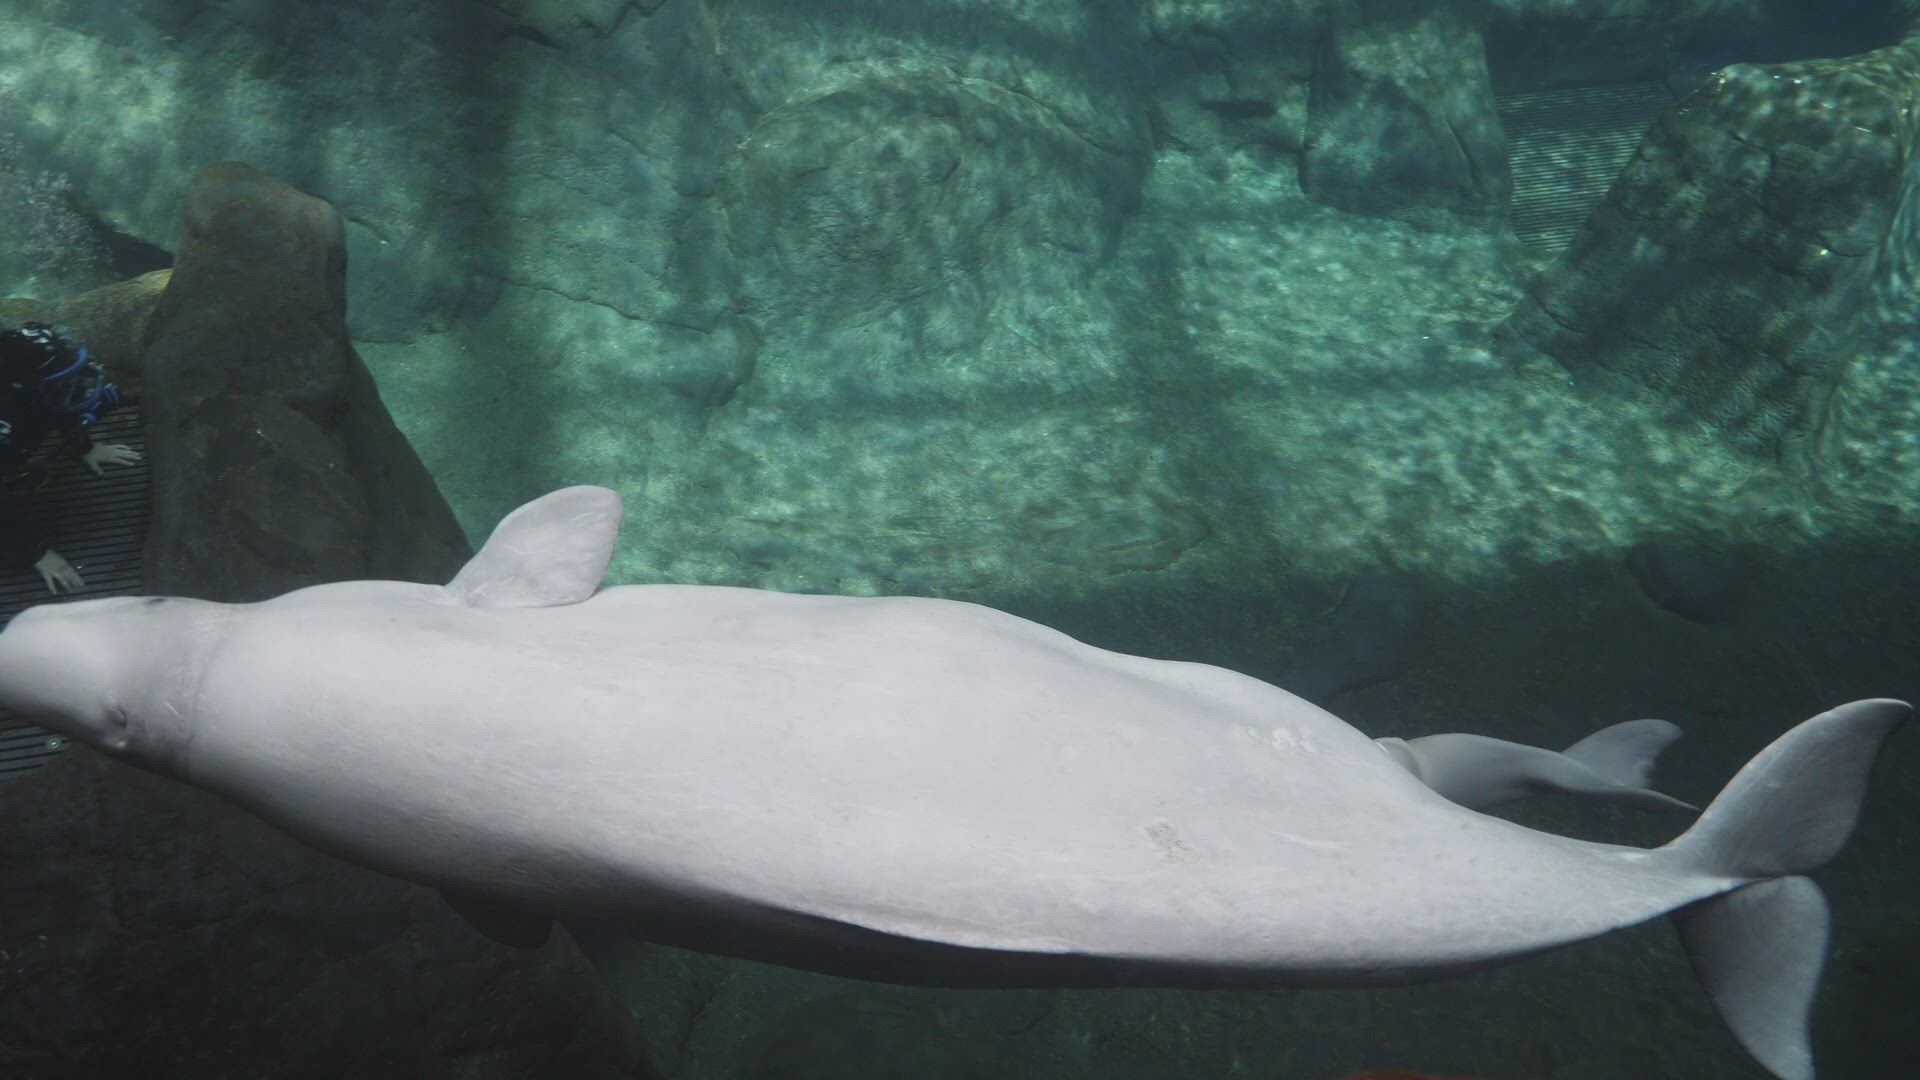 Officials at Georgia Aquarium have announced the birth of a baby beluga whale calf last weekend.